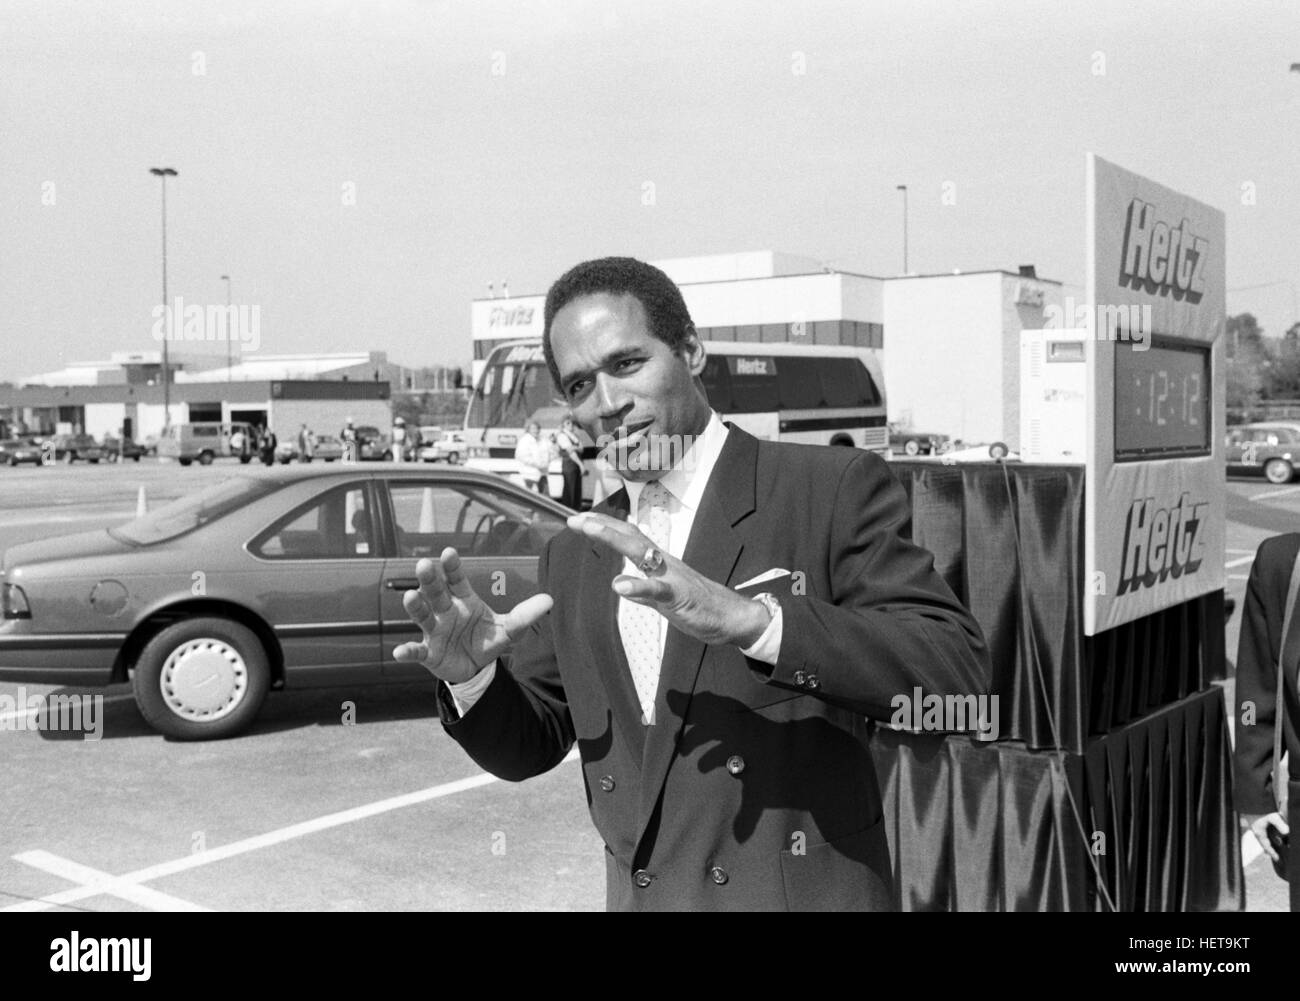 Athlete,spokesman and later - accused double murder O. J Simpson during a filming of a television ad at the Atlanta Airport. Simpson was the face of Hertz Rent a Car for many years. Orenthal James Simpson -born July 9, 1947, nicknamed 'the Juice', is a retired American football player, broadcaster, actor, and convicted felon currently incarcerated at the Lovelock Correctional Center in Nevada. Simpson played college football at the University of Southern California (USC), where he won the Heisman Trophy in 1968. He then played professionally in the National Football League (NFL) as a running b Stock Photo